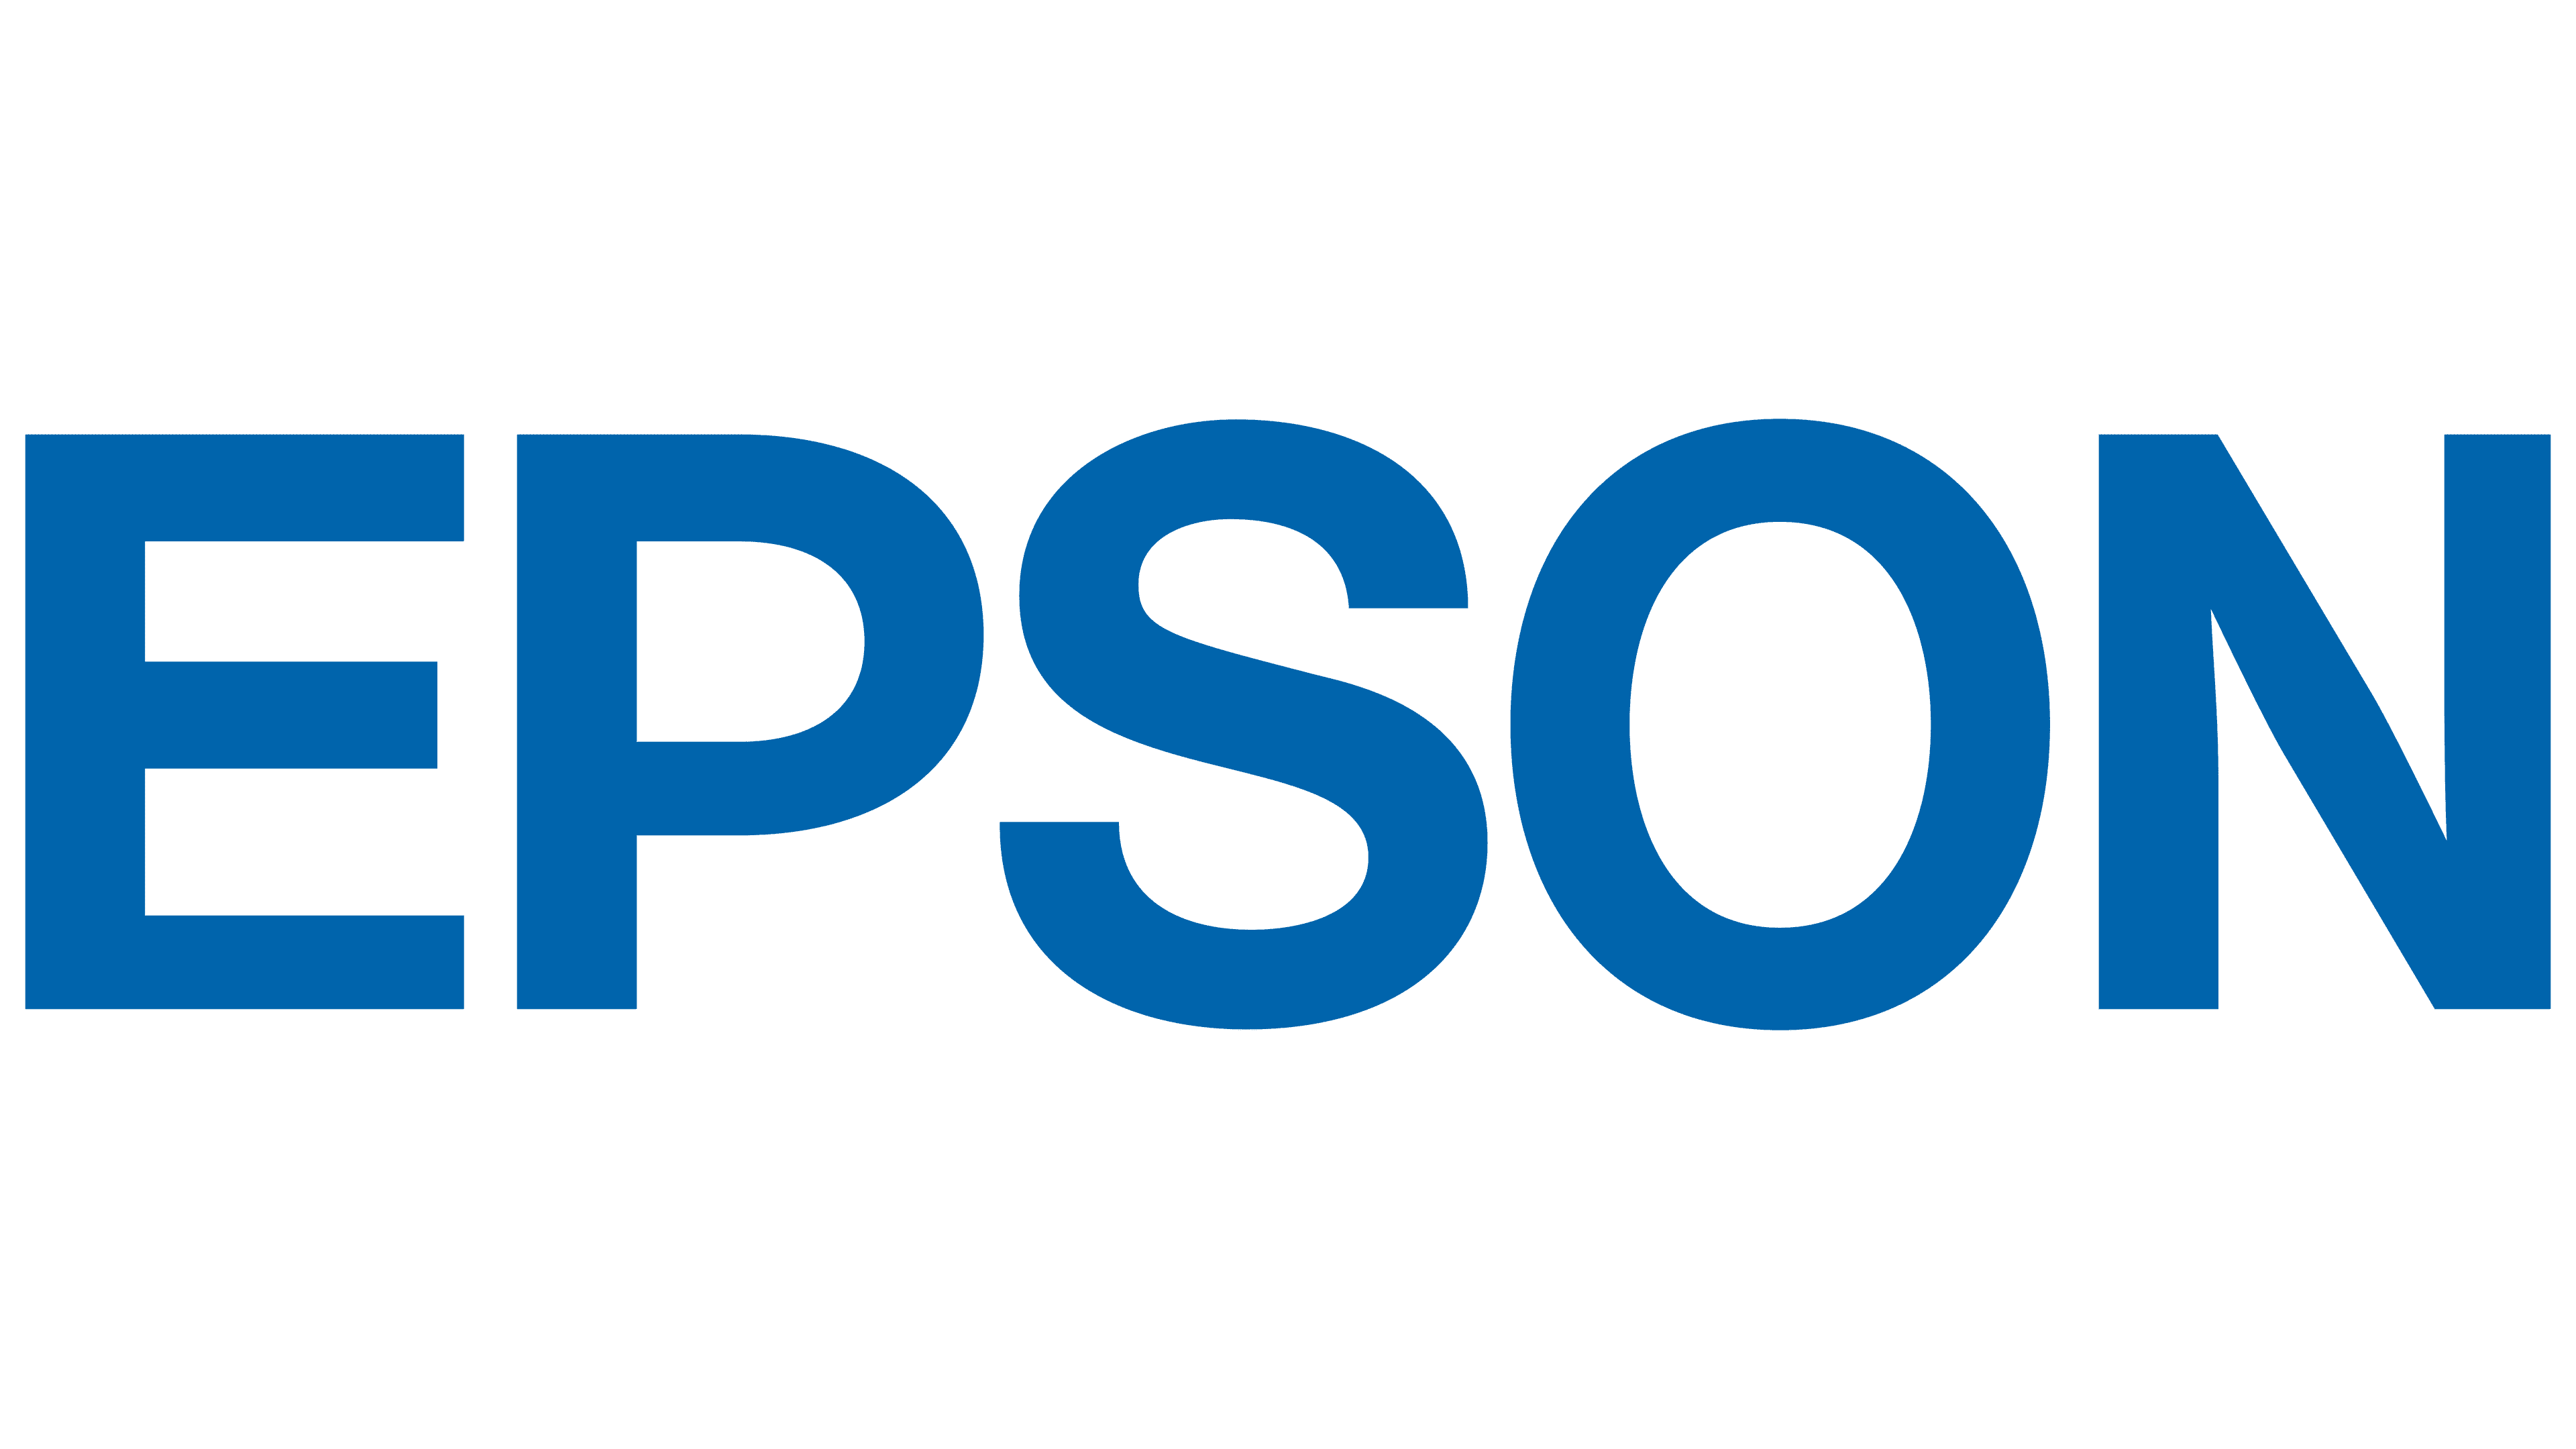 epson-logo-symbol-meaning-history-png-brand